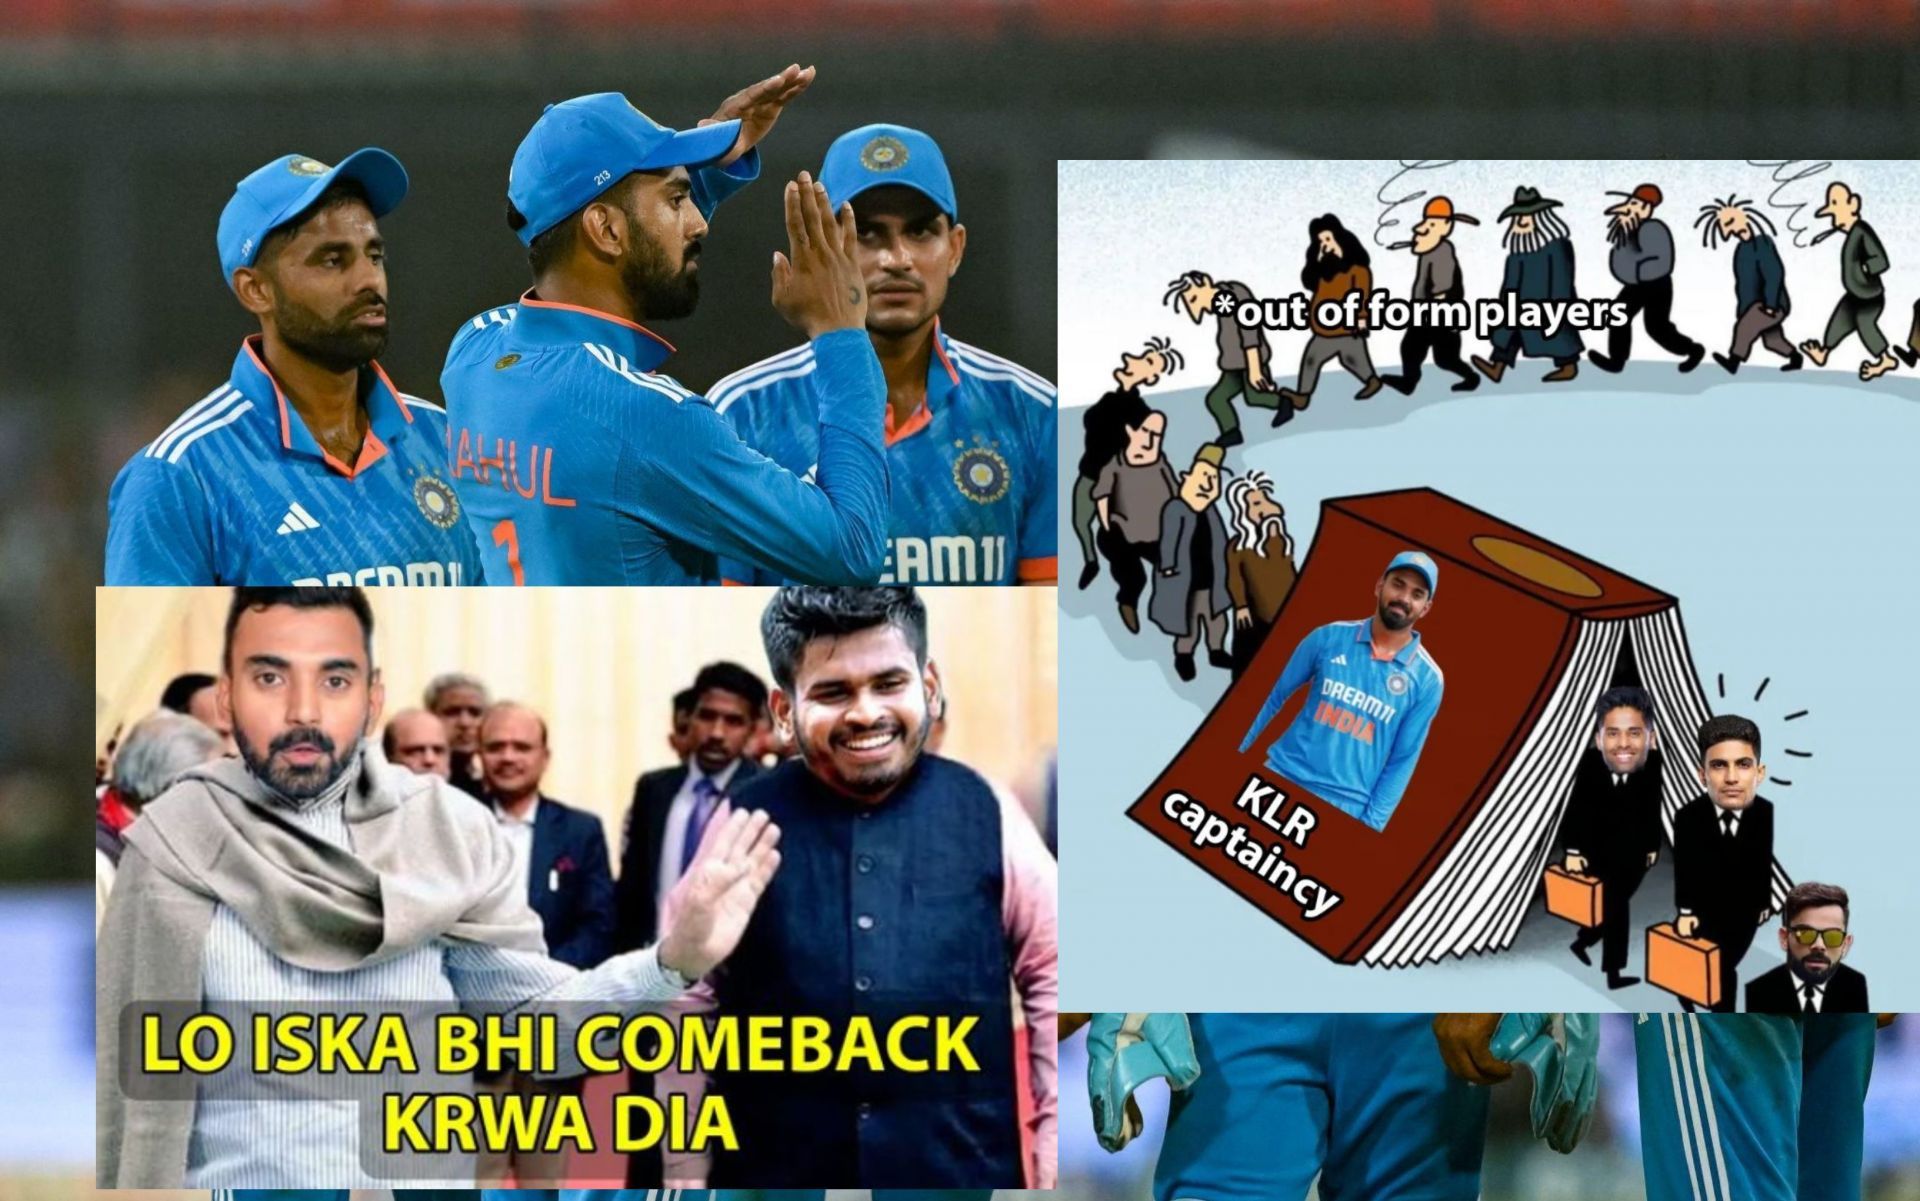 Fans react after India win series against Australia on Sunday under KL Rahul